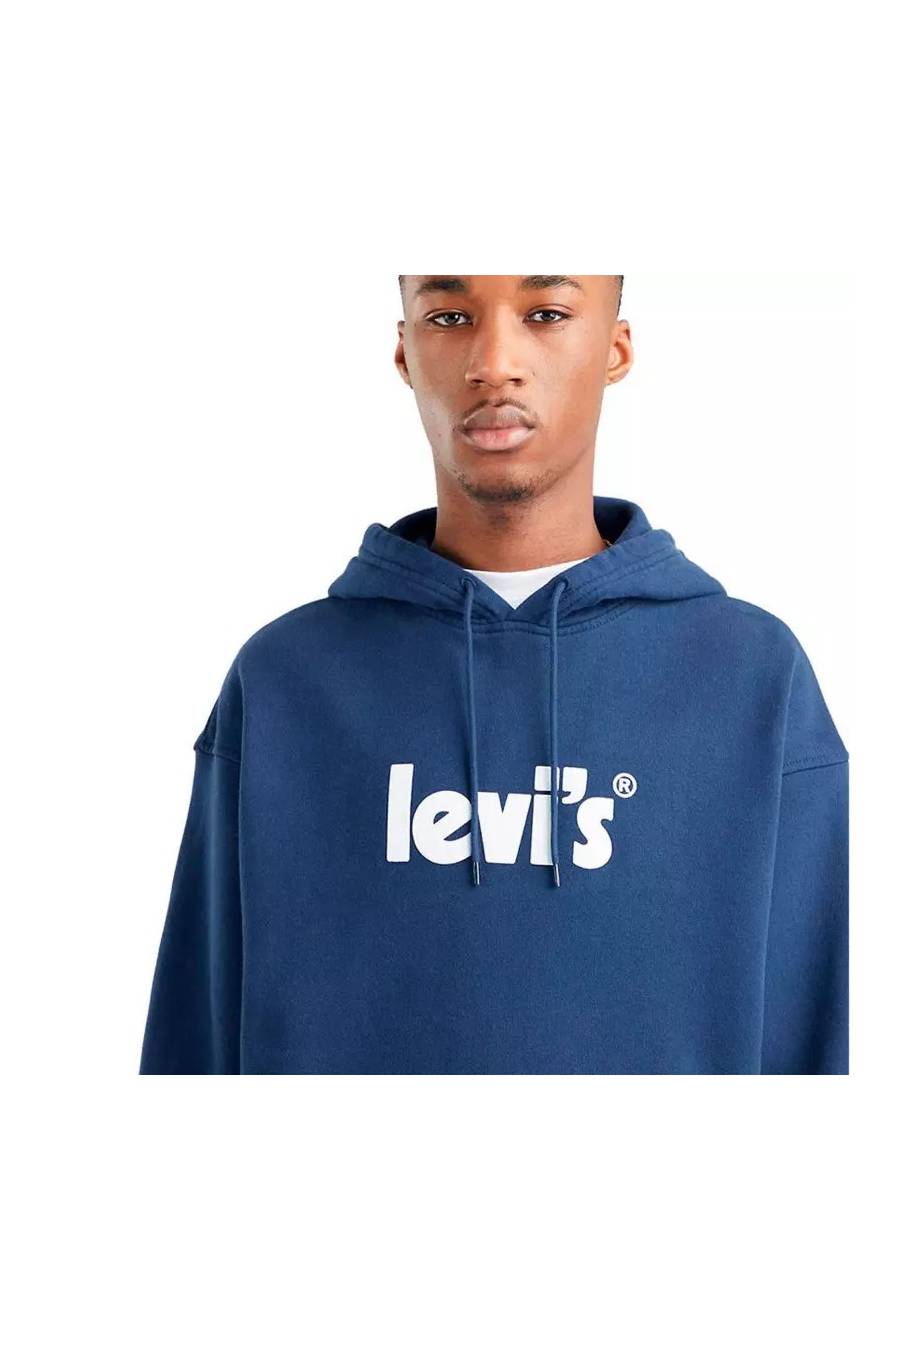 Sudadera Levi's Relaxed Graphic 38479-0081